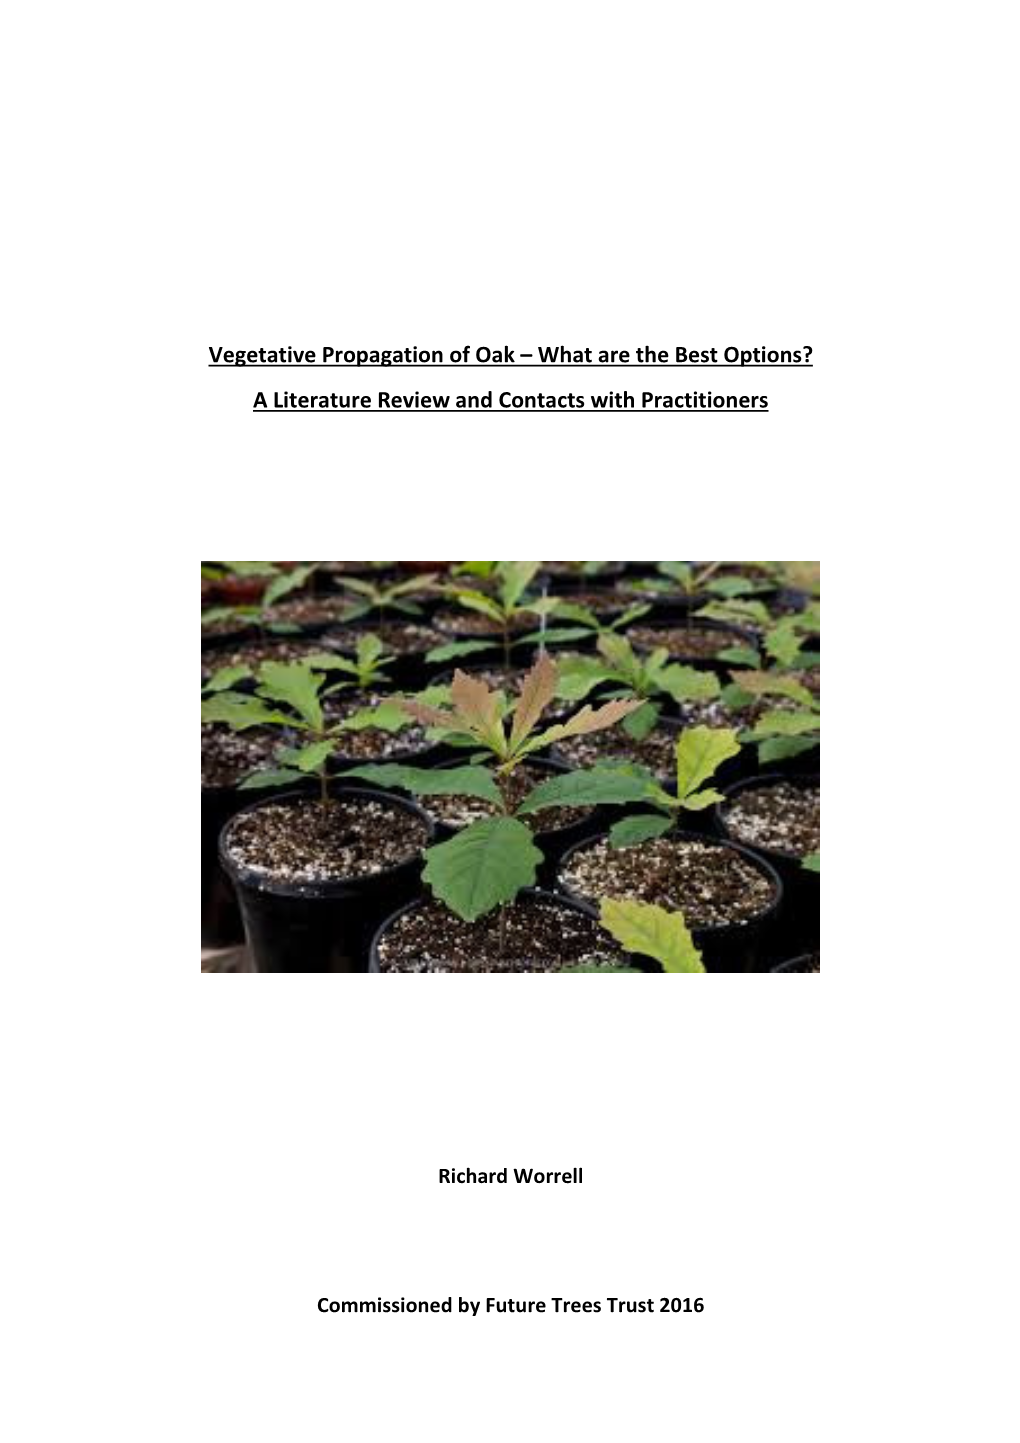 Vegetative Propagation of Oak What Are the Best Options? a Literature